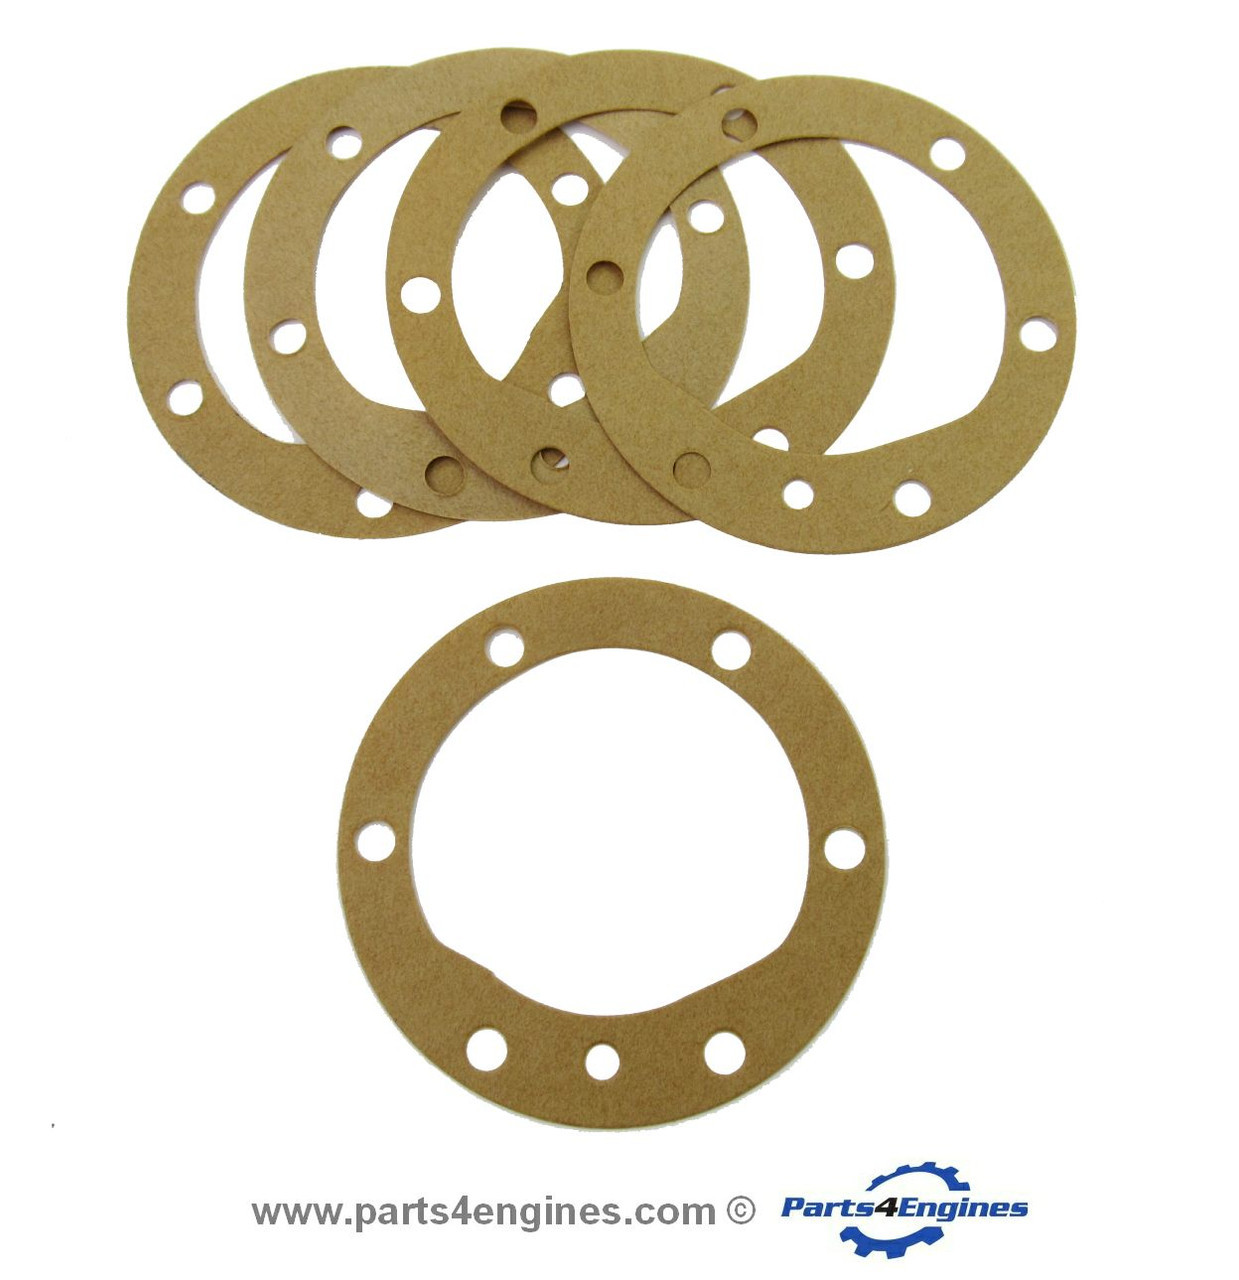 Raw water pump cover plate gasket set